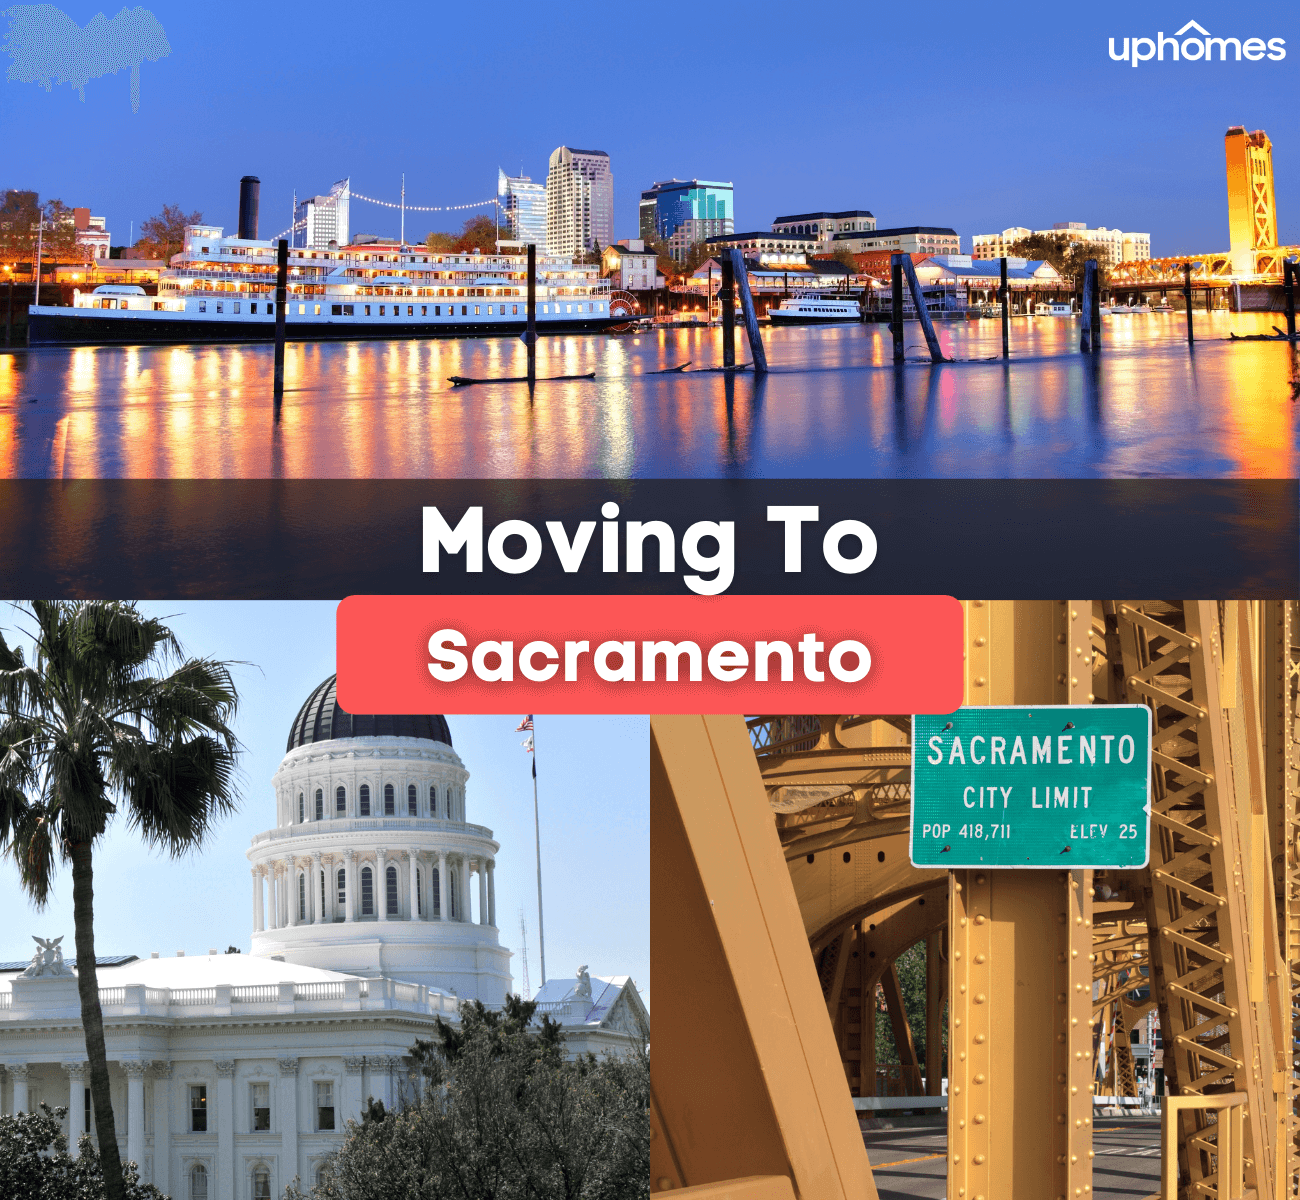 Moving to Sacramento - What is it like living in Sacramento, CA?